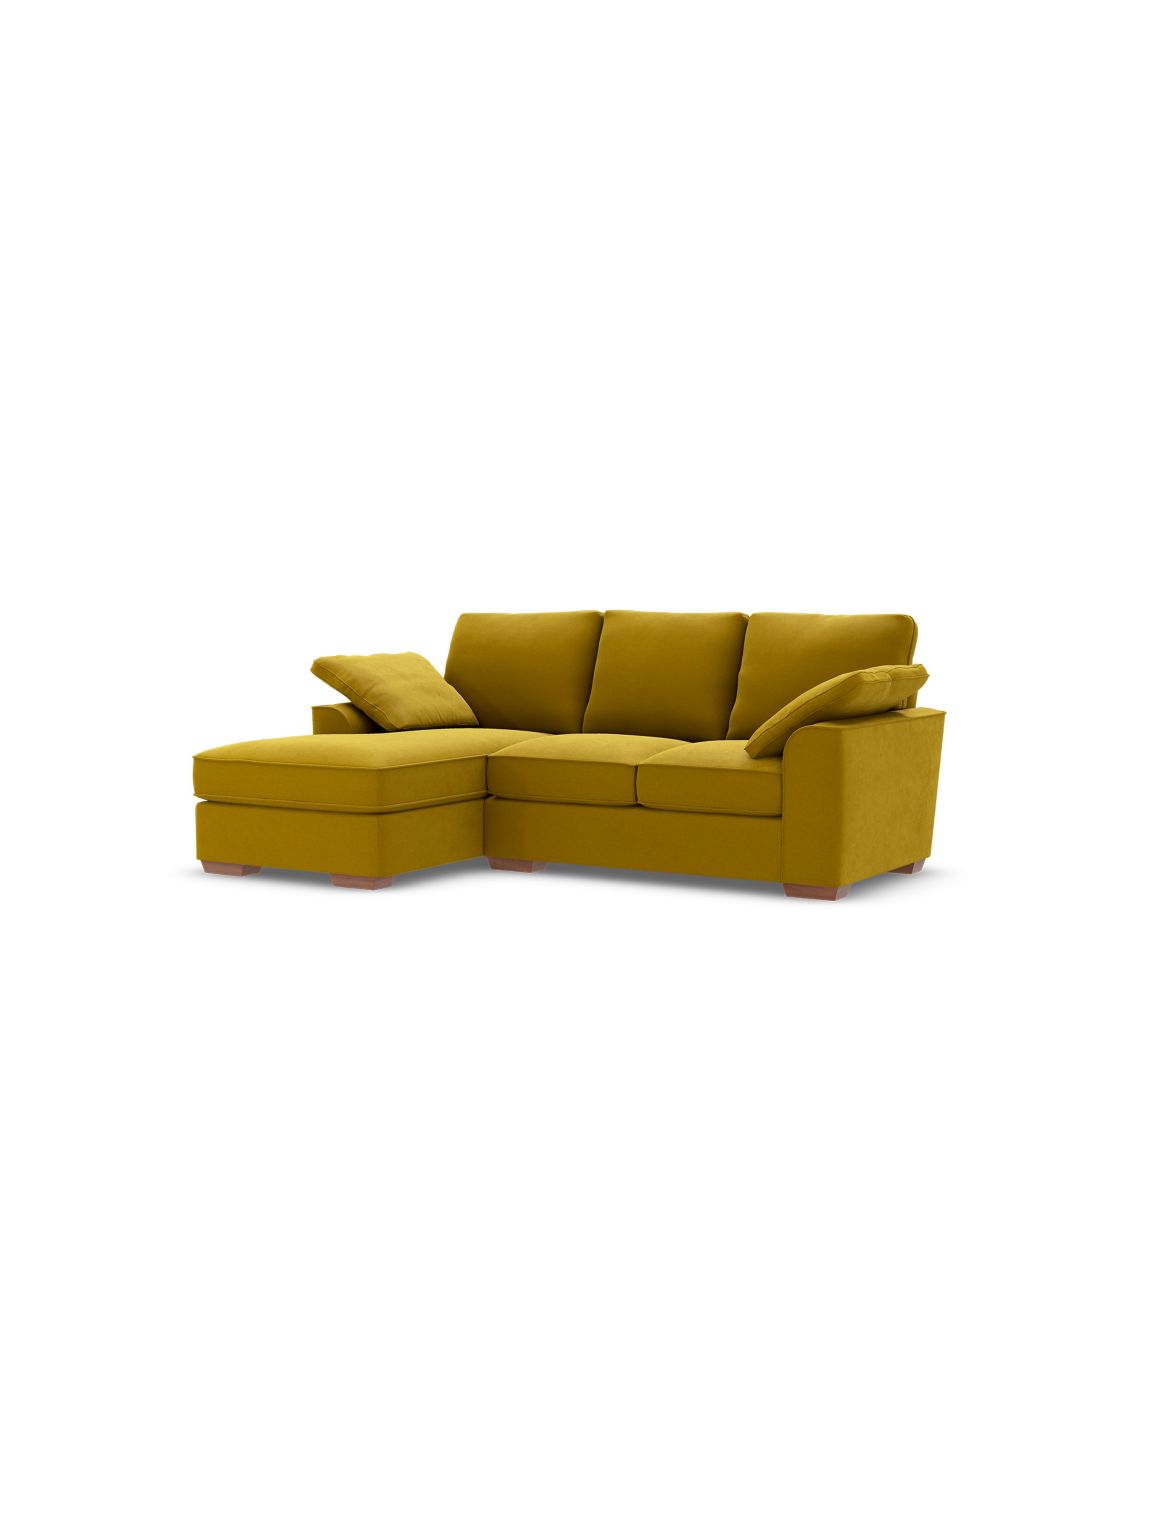 Nantucket 3 Seater Chaise (Left-Hand) yellow